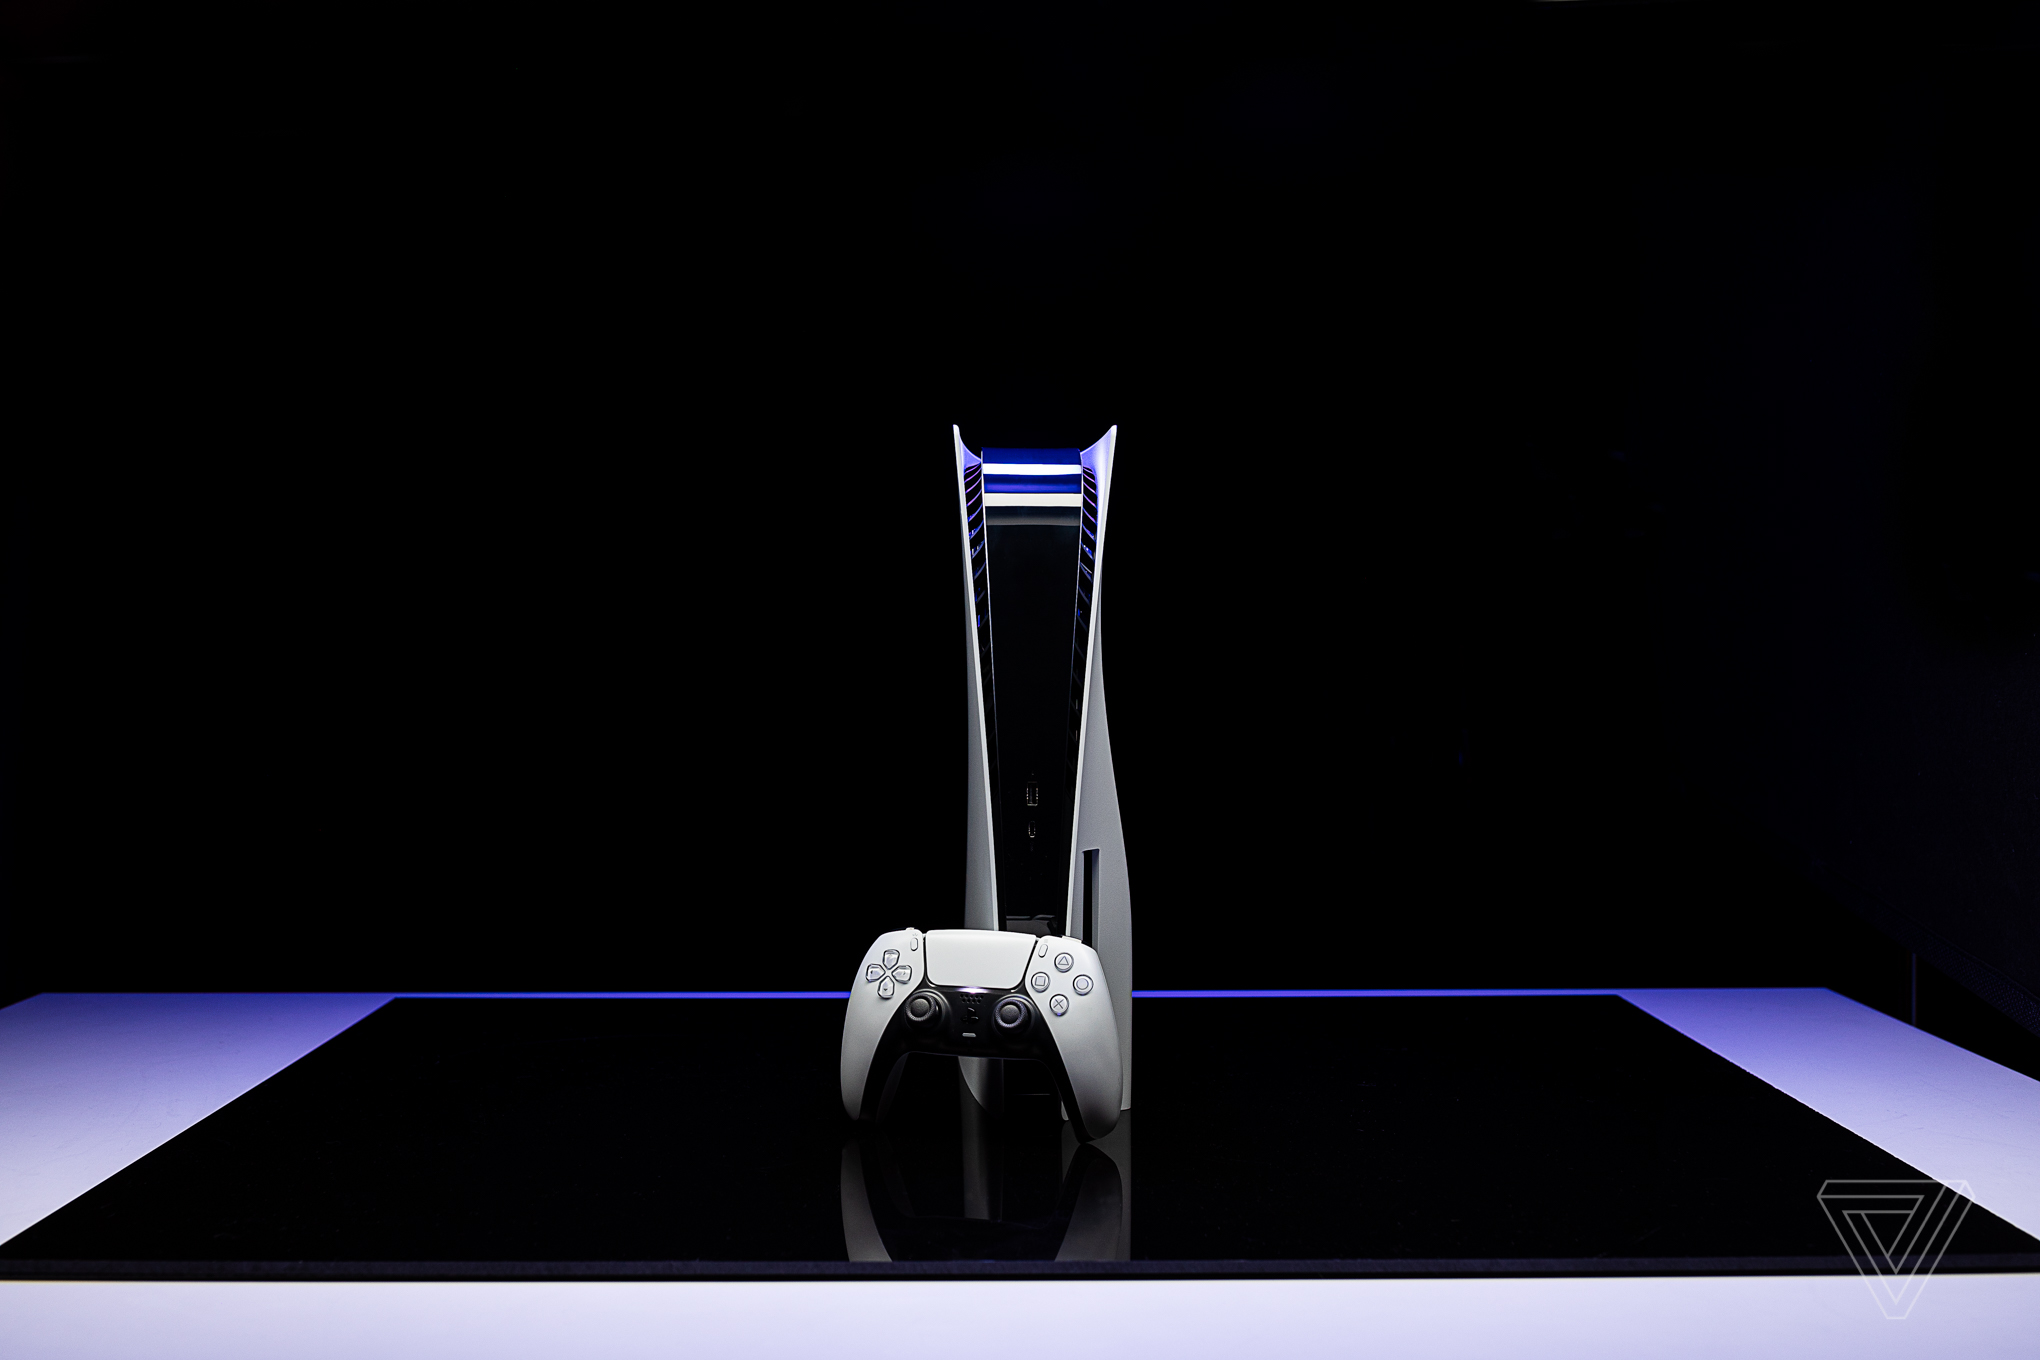 A studio shot of the PlayStation 5 standing vertically with an upright DualSense controller in front of it, against a black background.